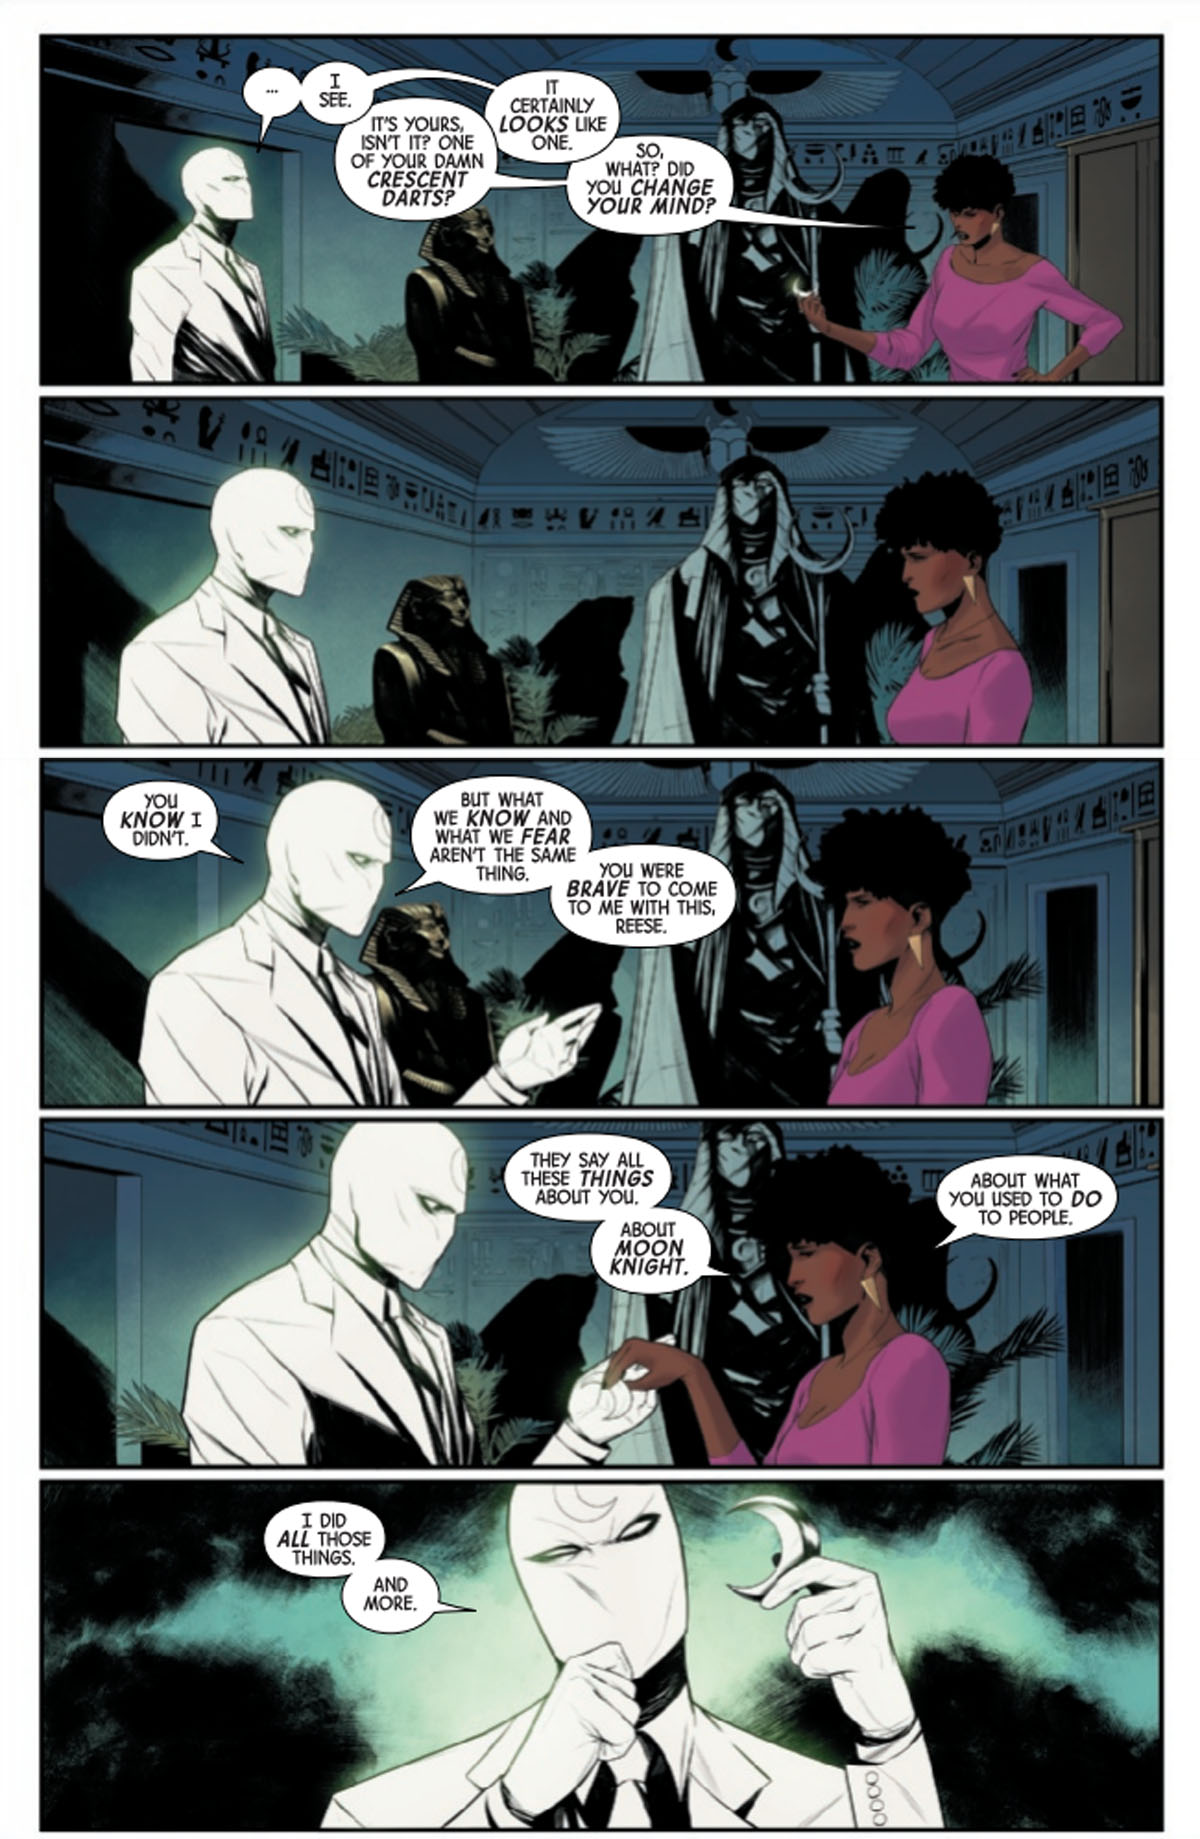 Moon Knight #3 page 4